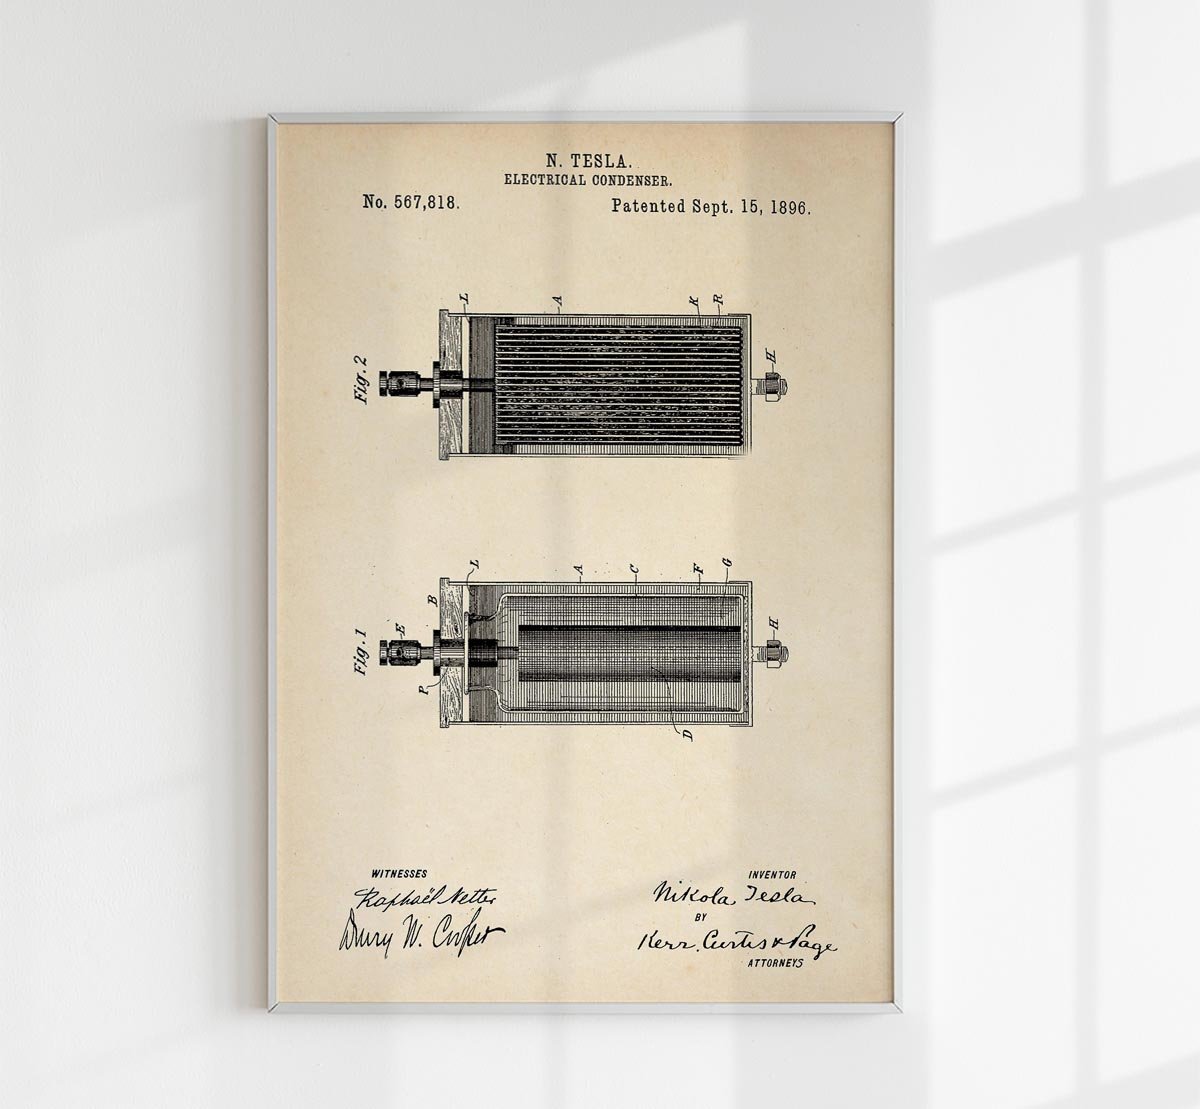 Tesla's Electrical Condenser Patent Poster